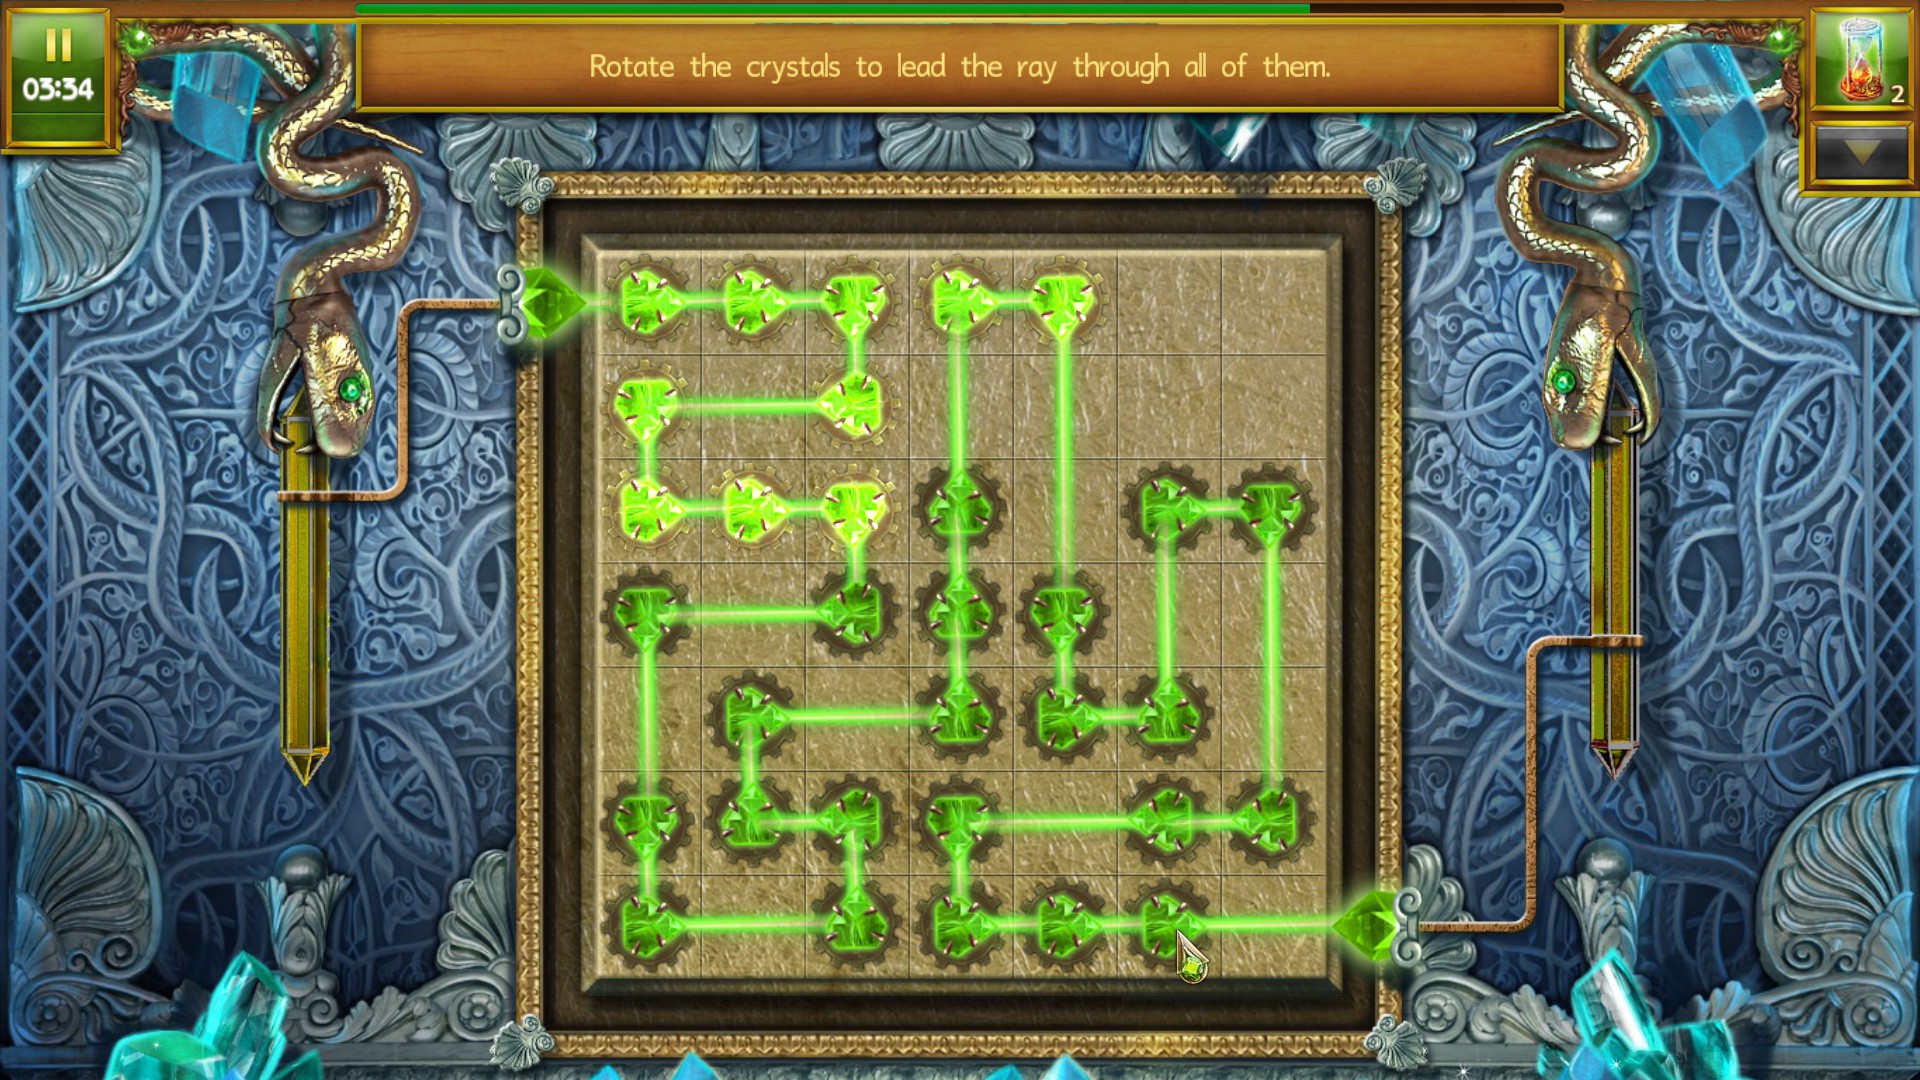 Lost Lands: Mahjong instal the last version for iphone